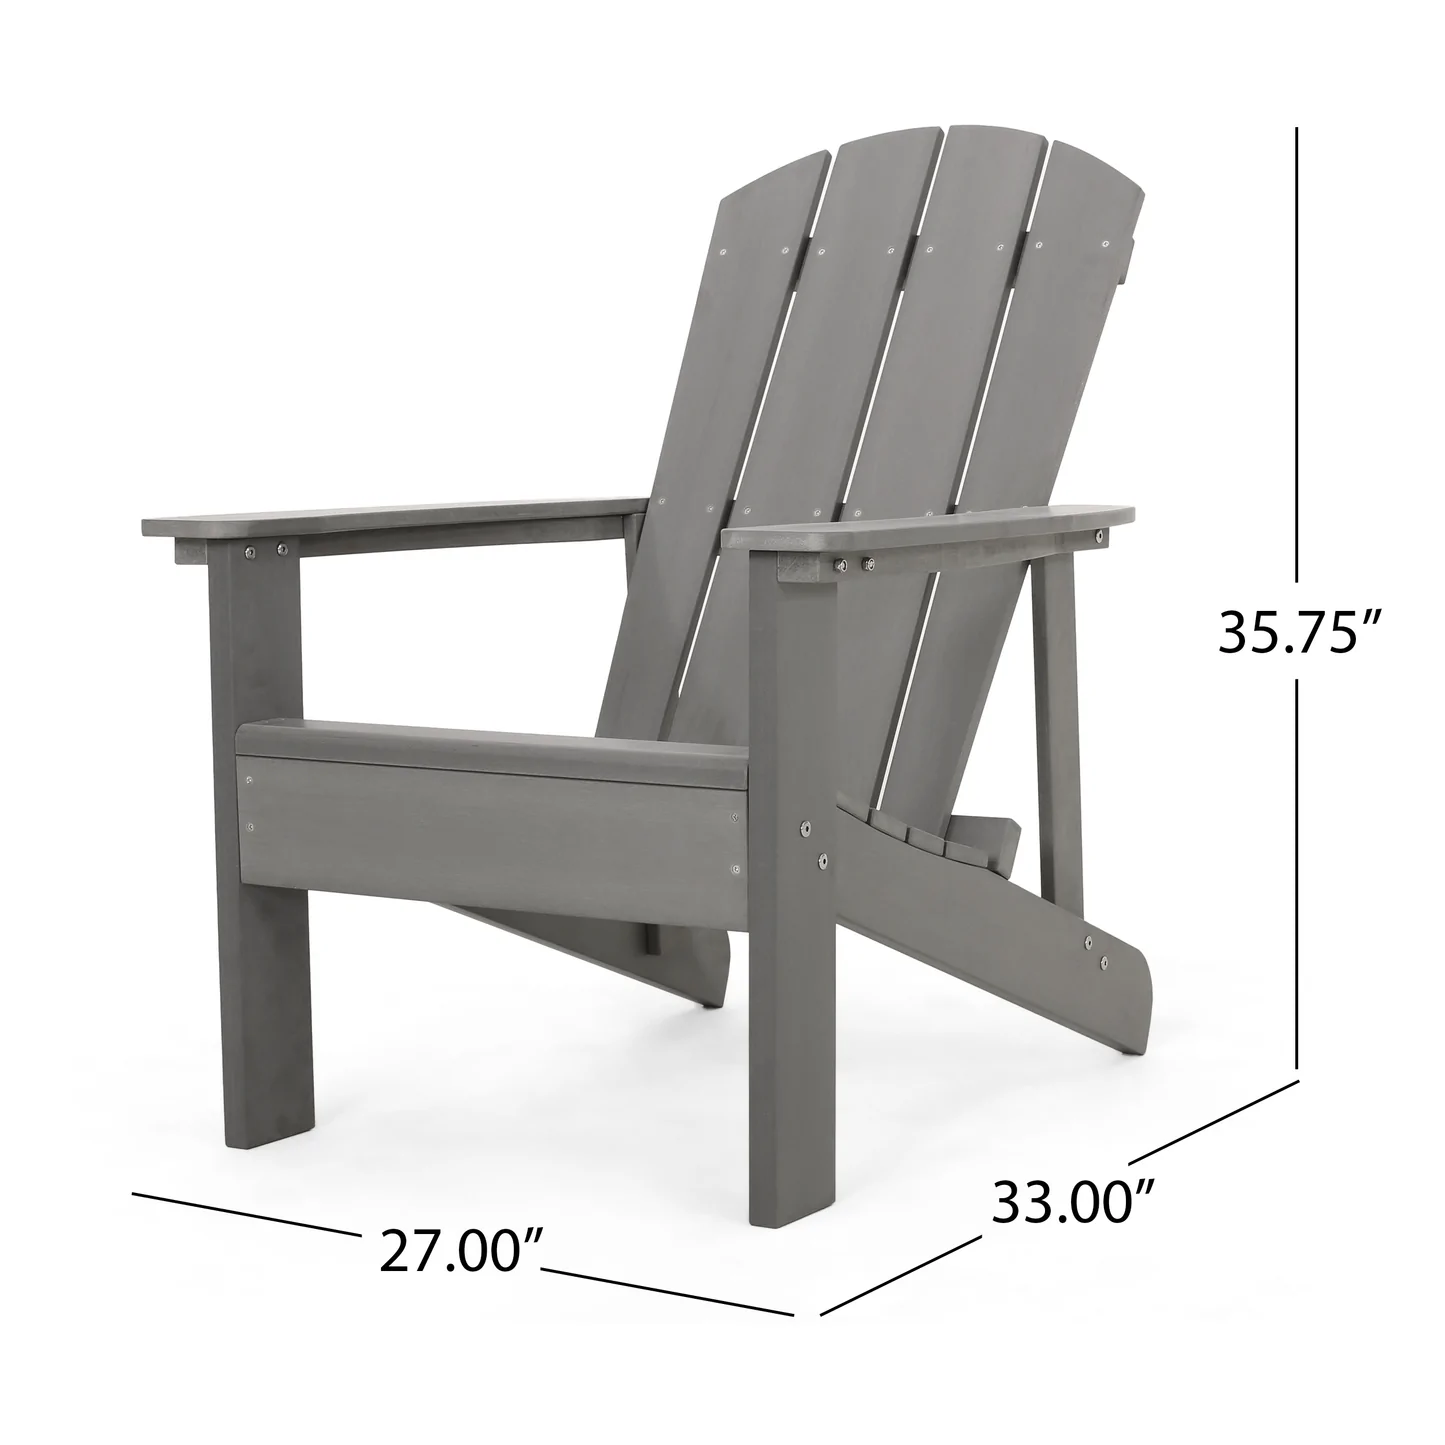 KUIKUI Classic Solid Gray Outdoor Solid Wood Adirondack Chair Garden Lounge Chair - image 4 of 8